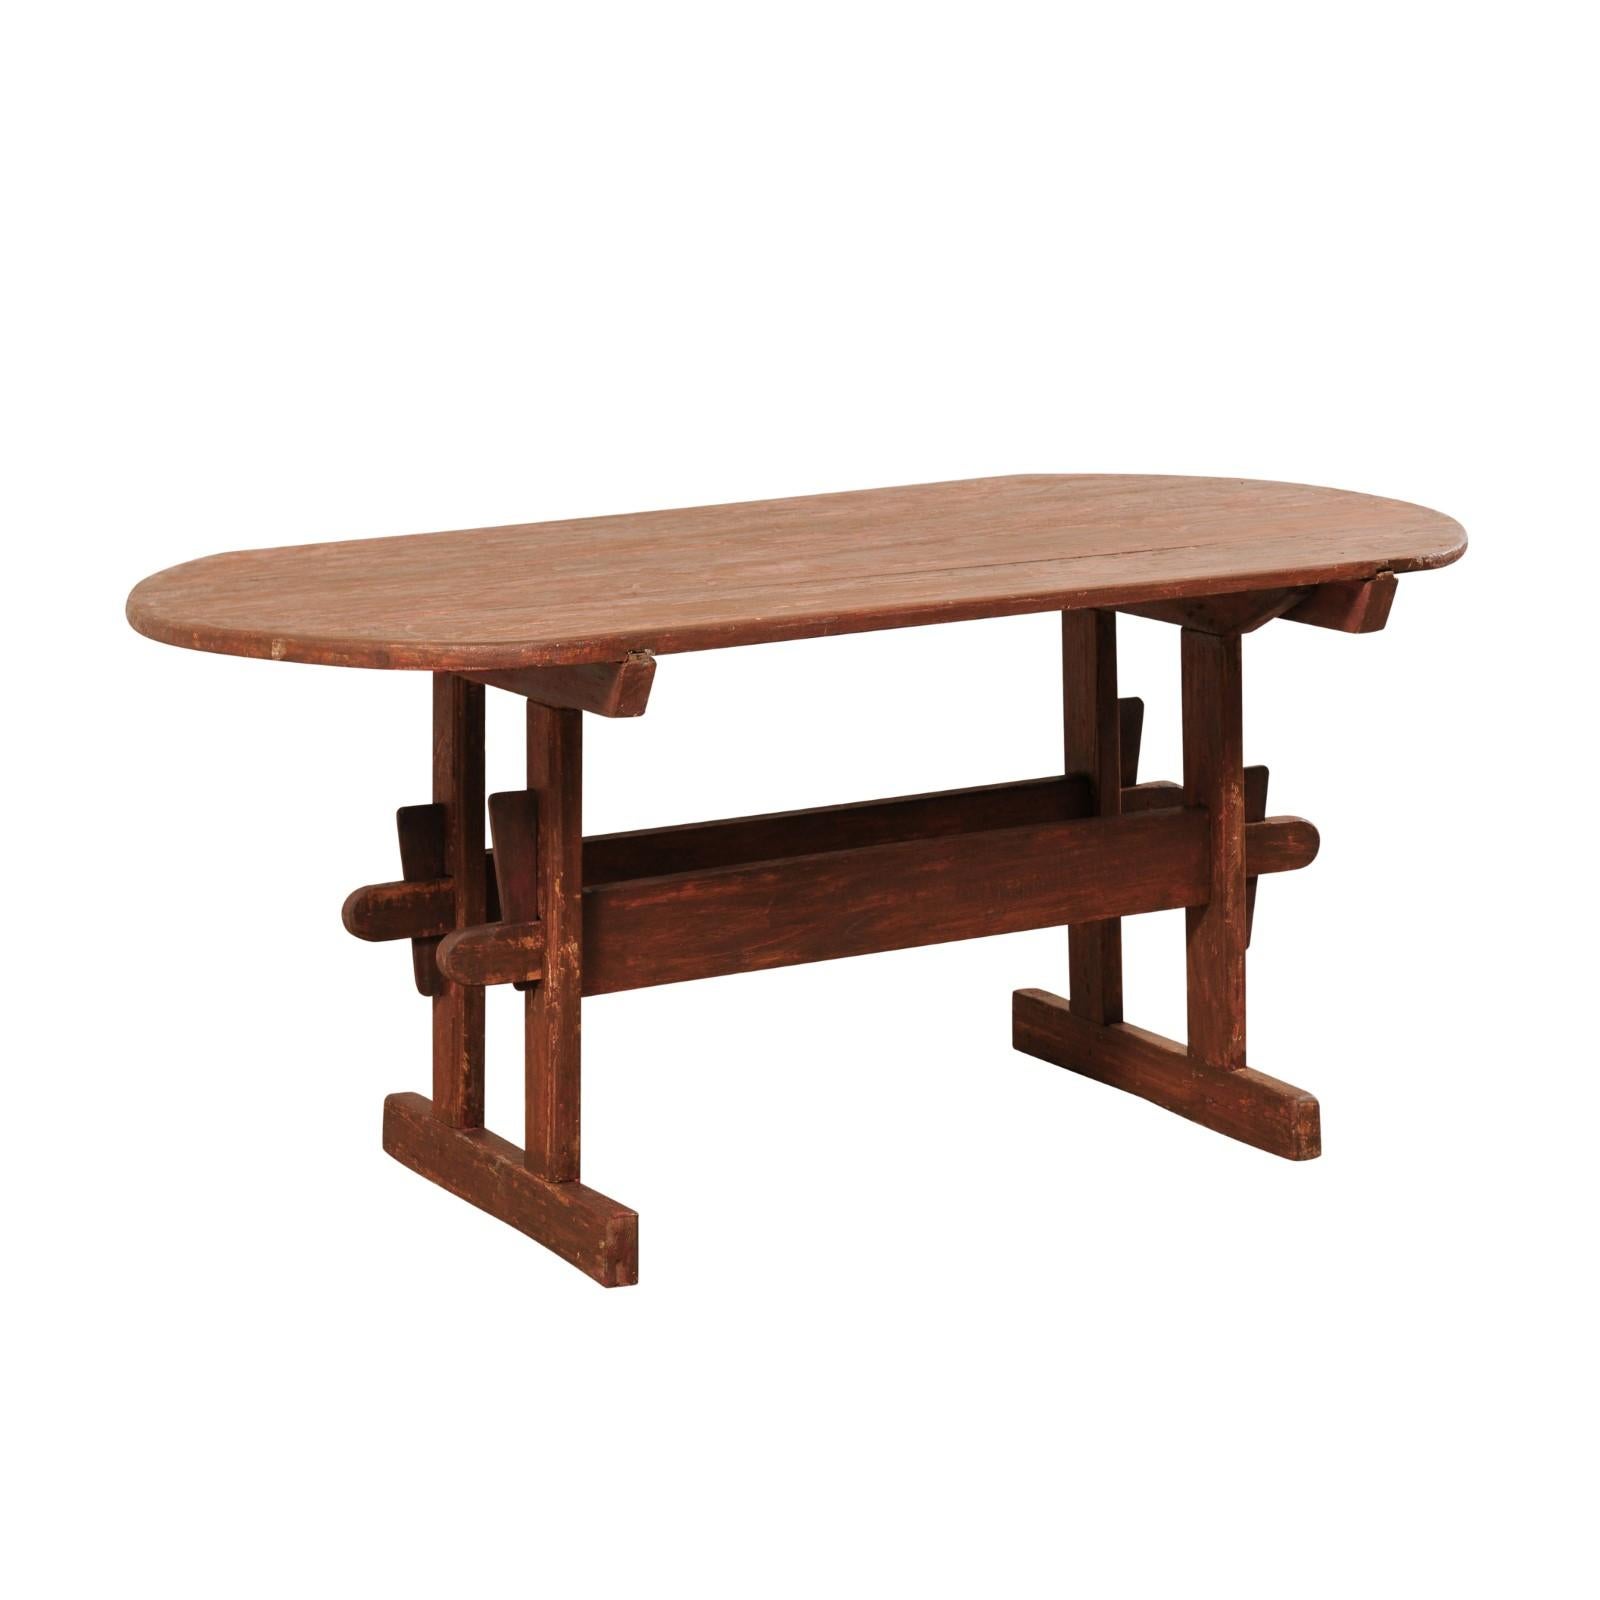 Early 19th Century Swedish Falun Red Wood Trestle Breakfast Table or Desk For Sale